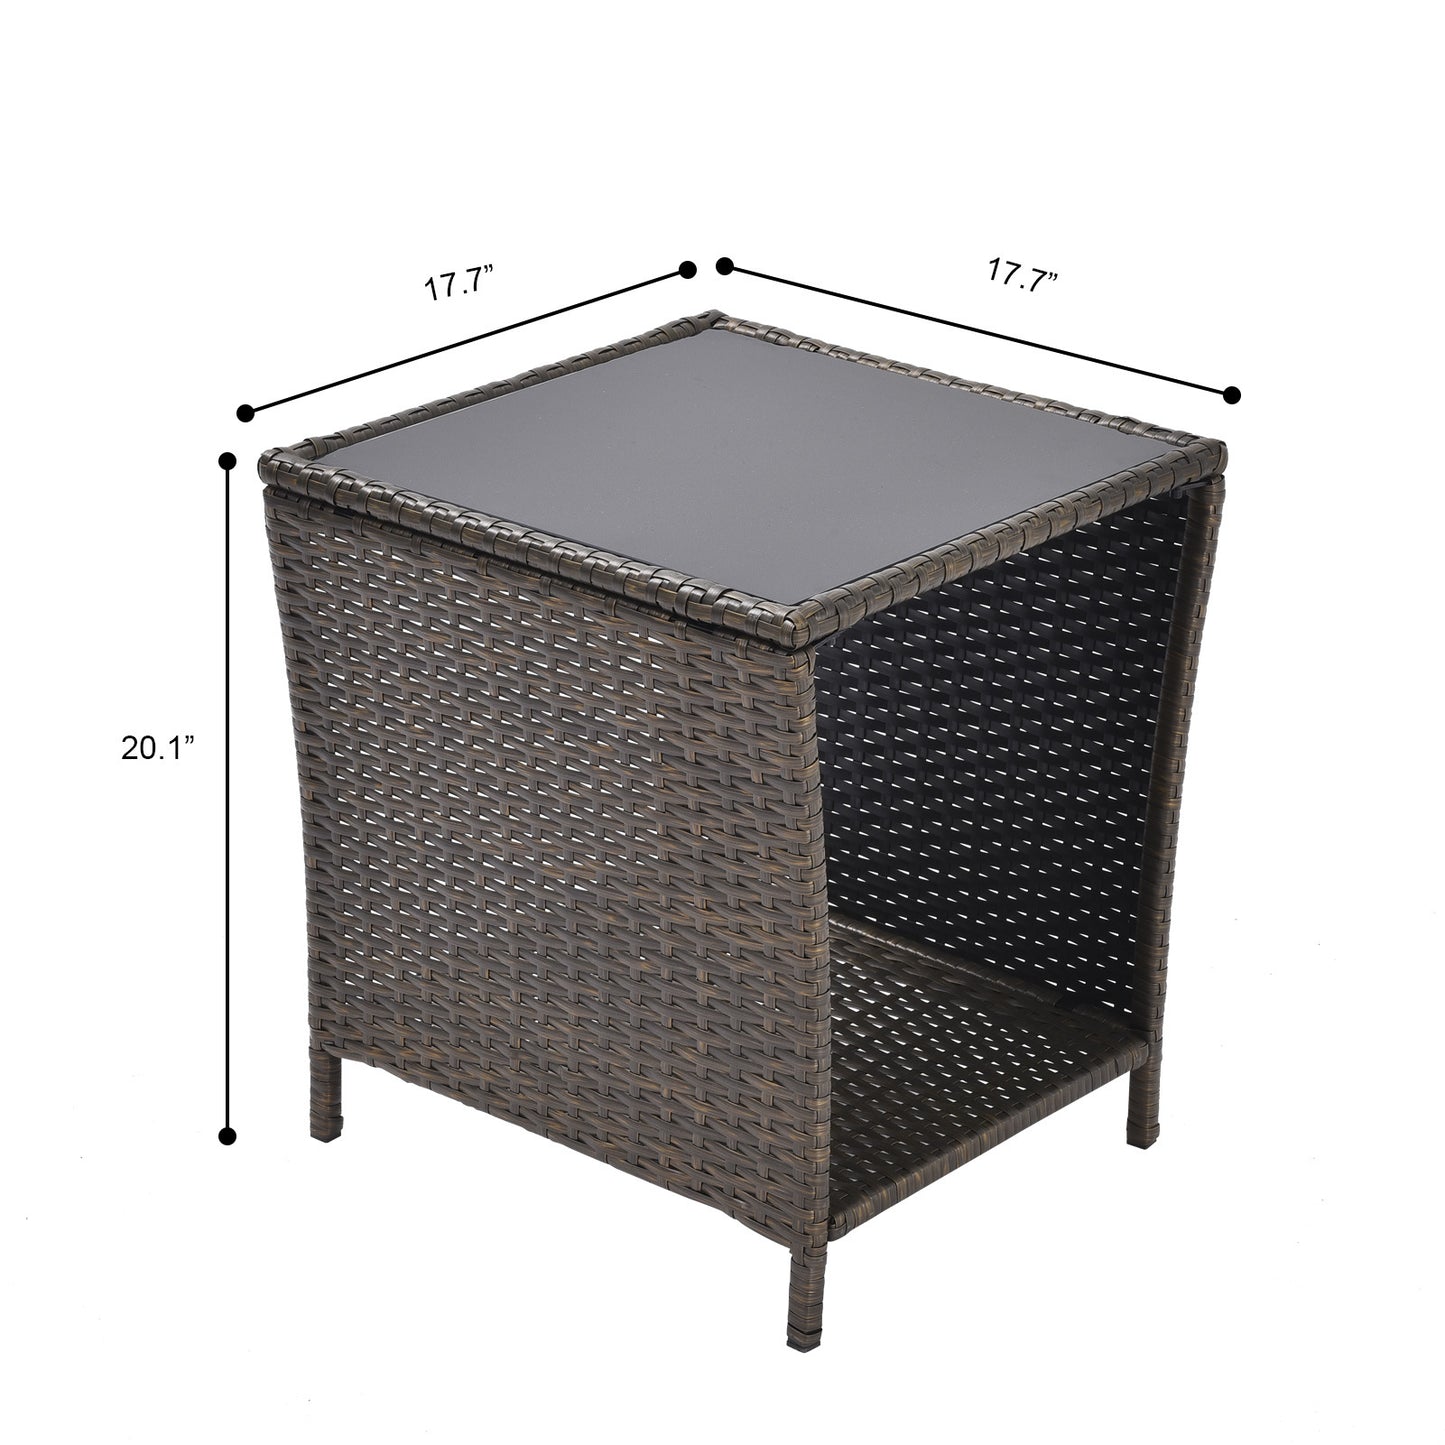 Outdoor Side Coffee Table with Storage Shelf,All Weather PE Rattan and Steel Frame,Patio Furniture Square,Bistro Table for Garden Porch,Backyard Pool Indoor (Black Gold)